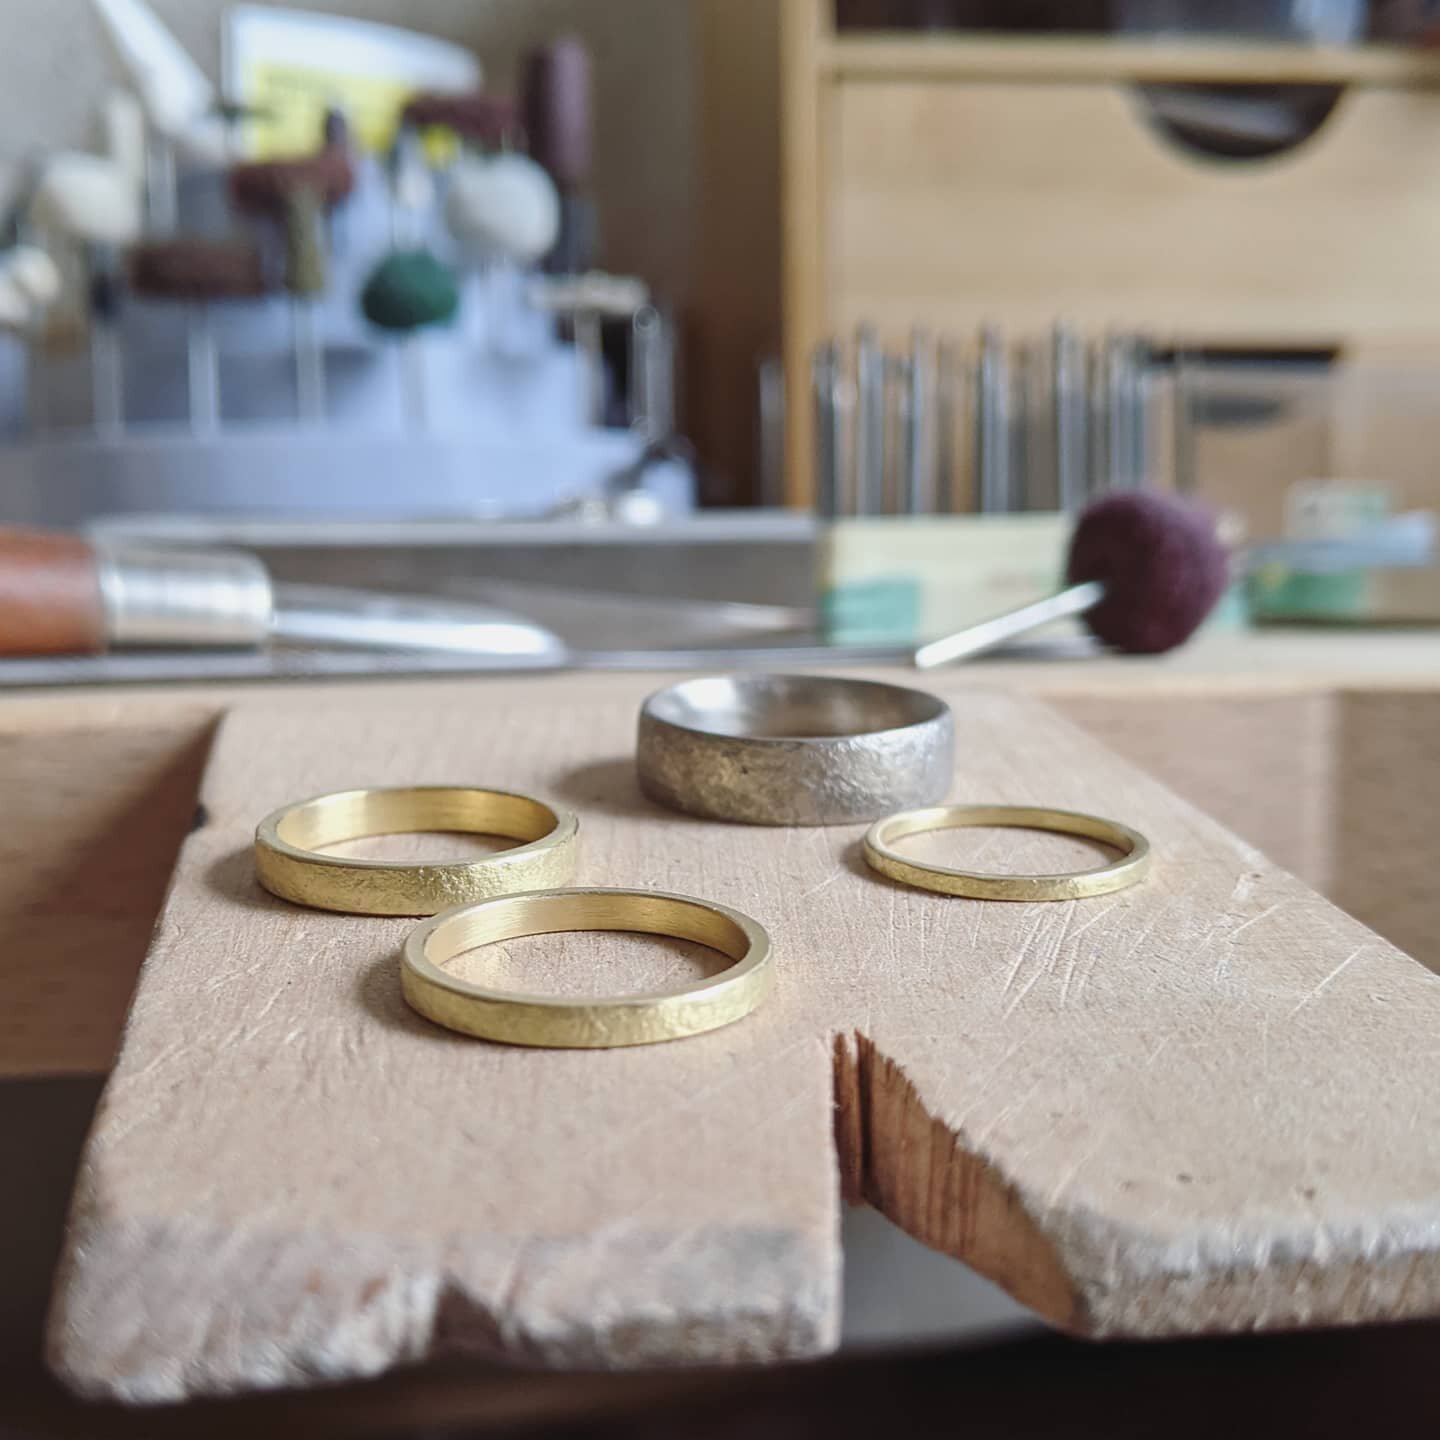 18ct yellow and white gold hammer textured wedding rings. 18ct gold is such a dream to work with 😍

#recycledgold #alternativebridal #handmadeweddingrings #scottishwedding #textures #roughluxe #scottishjeweller #lifeofajeweller #stoneage